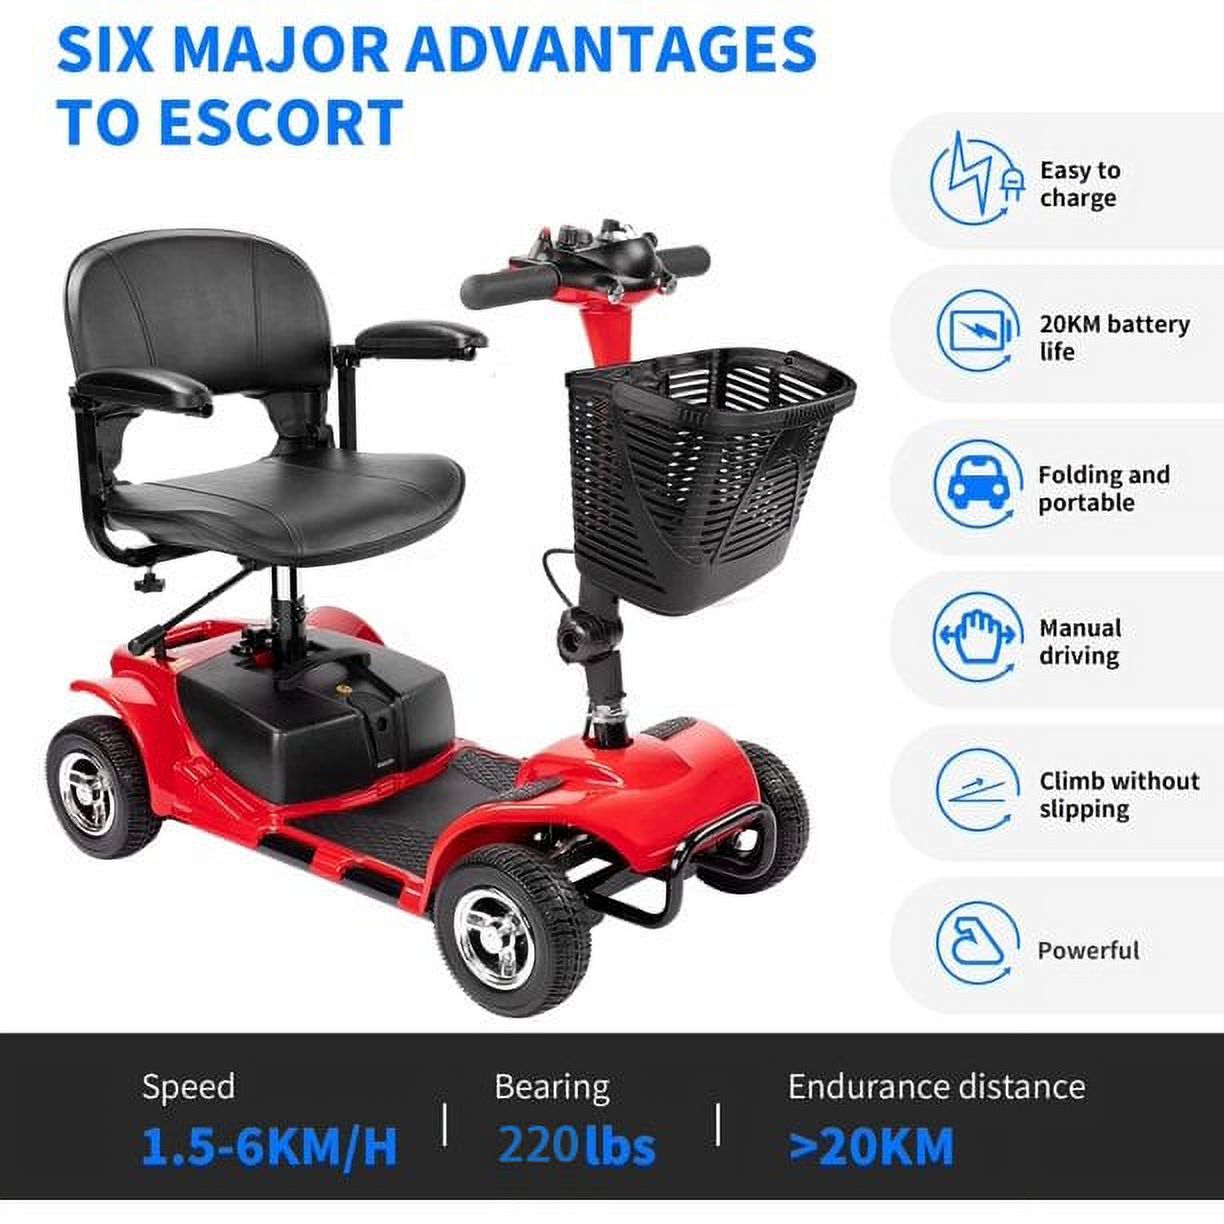 1inchome 4 Wheel Mobility Scooter for Seniors, Folding Electric Powered Wheelchair Device for Adults, Elderly, Gift for Elderly, Red - image 2 of 10